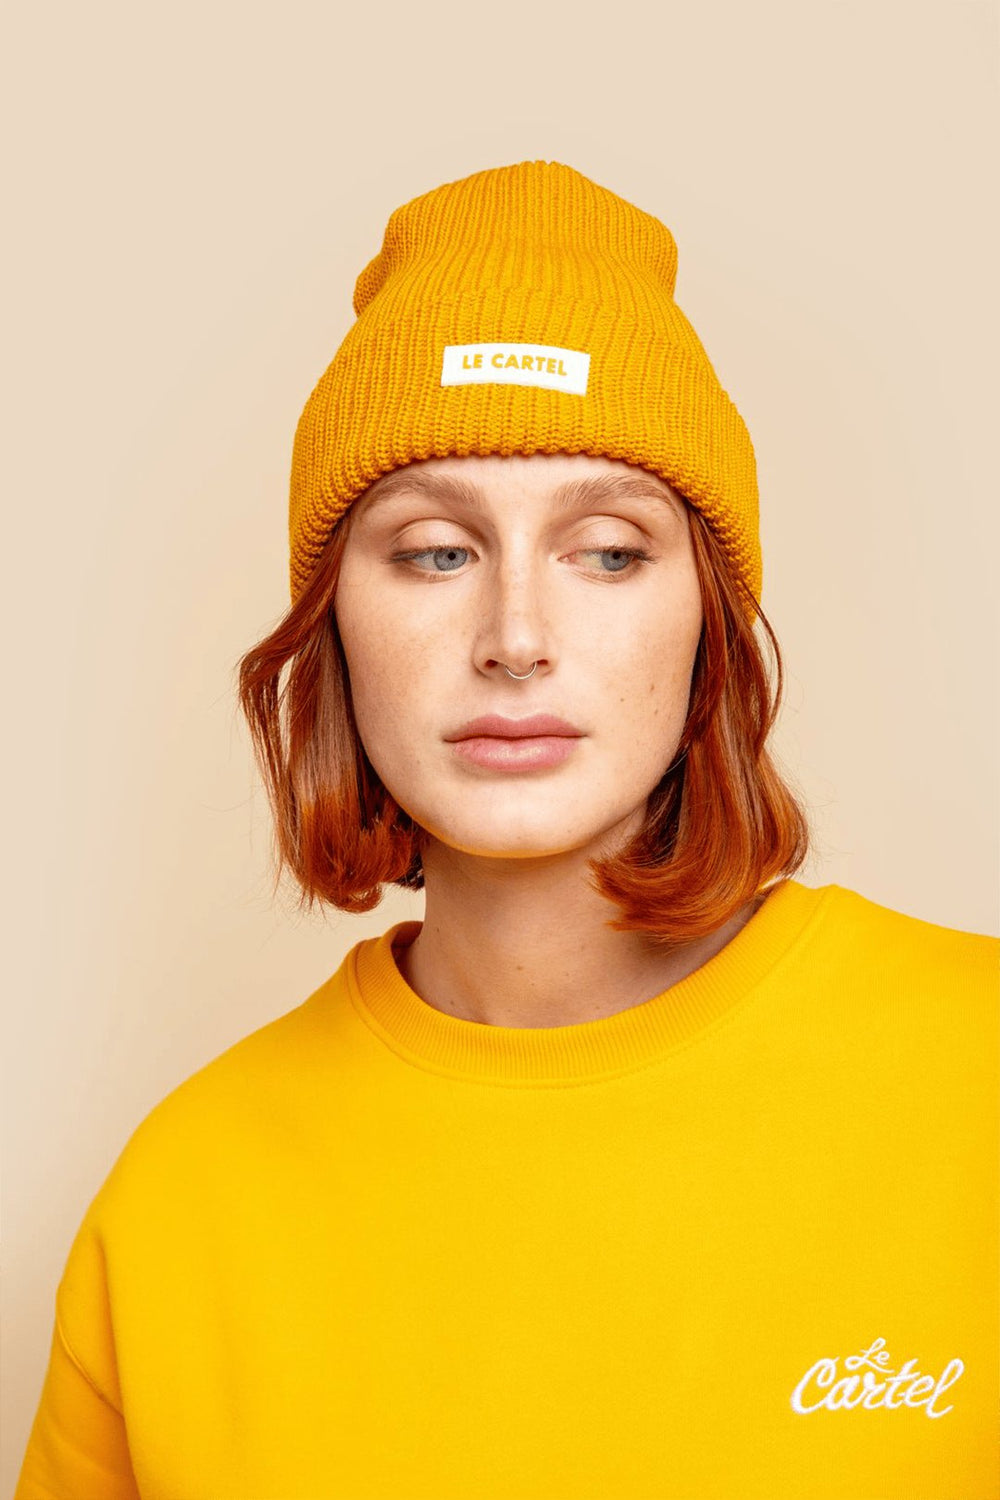 CHUNKY・Tuque grosse maille・Safran - Le Cartel